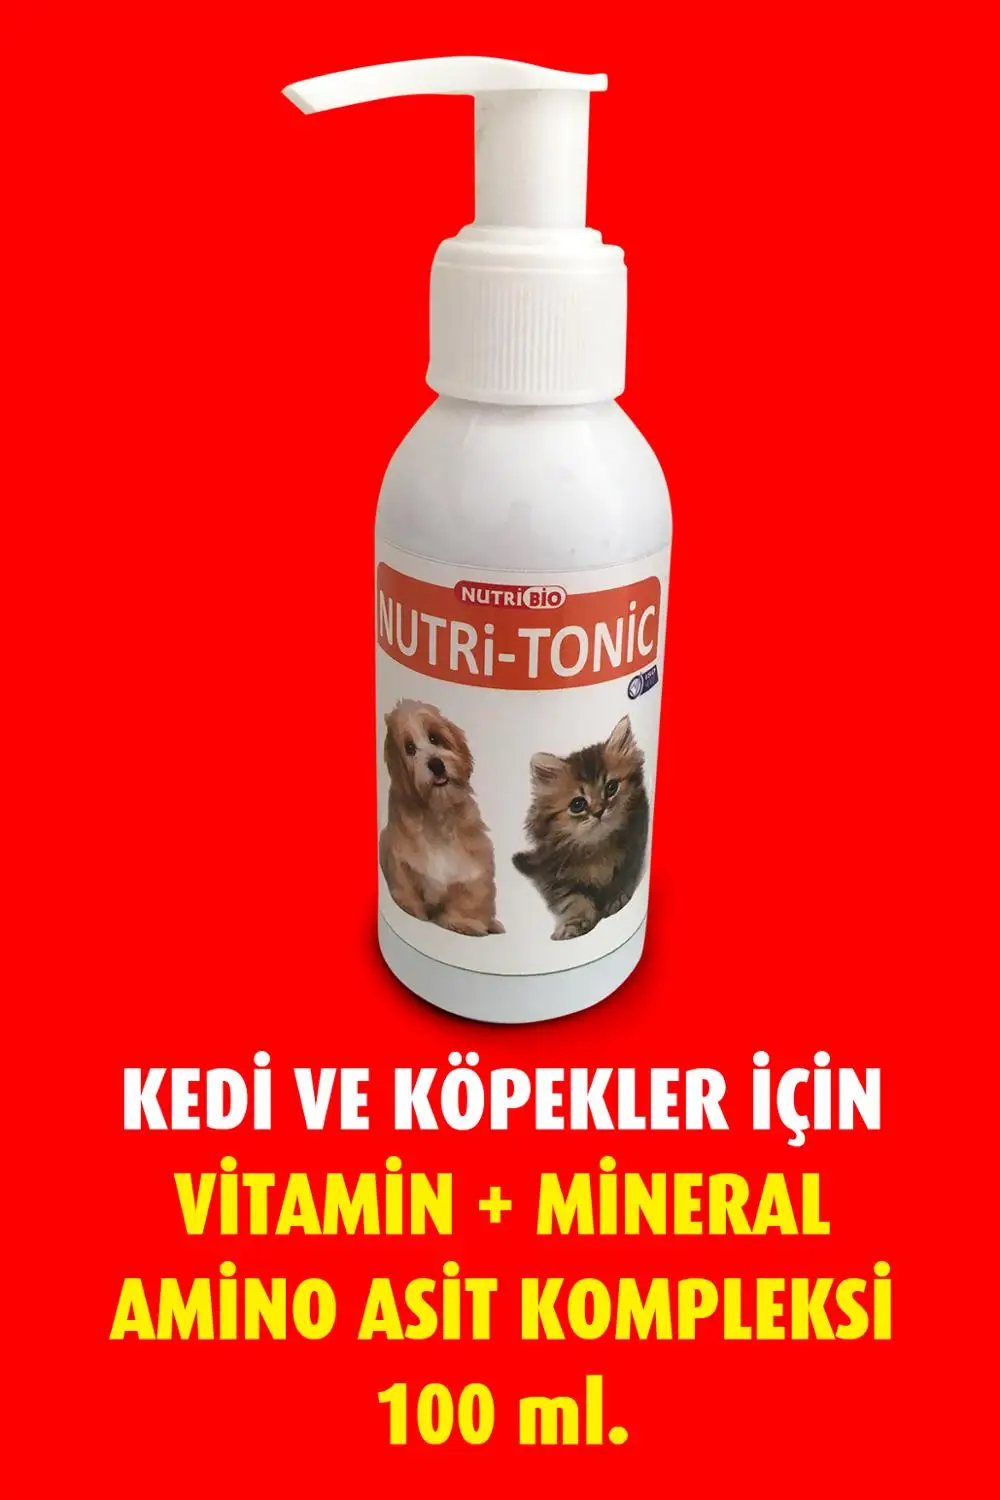 

MULTIVITAMIN FOR CATS AND DOGS It protects cats and dogs from diseases and increases their immunity. With 100ml liquid pump